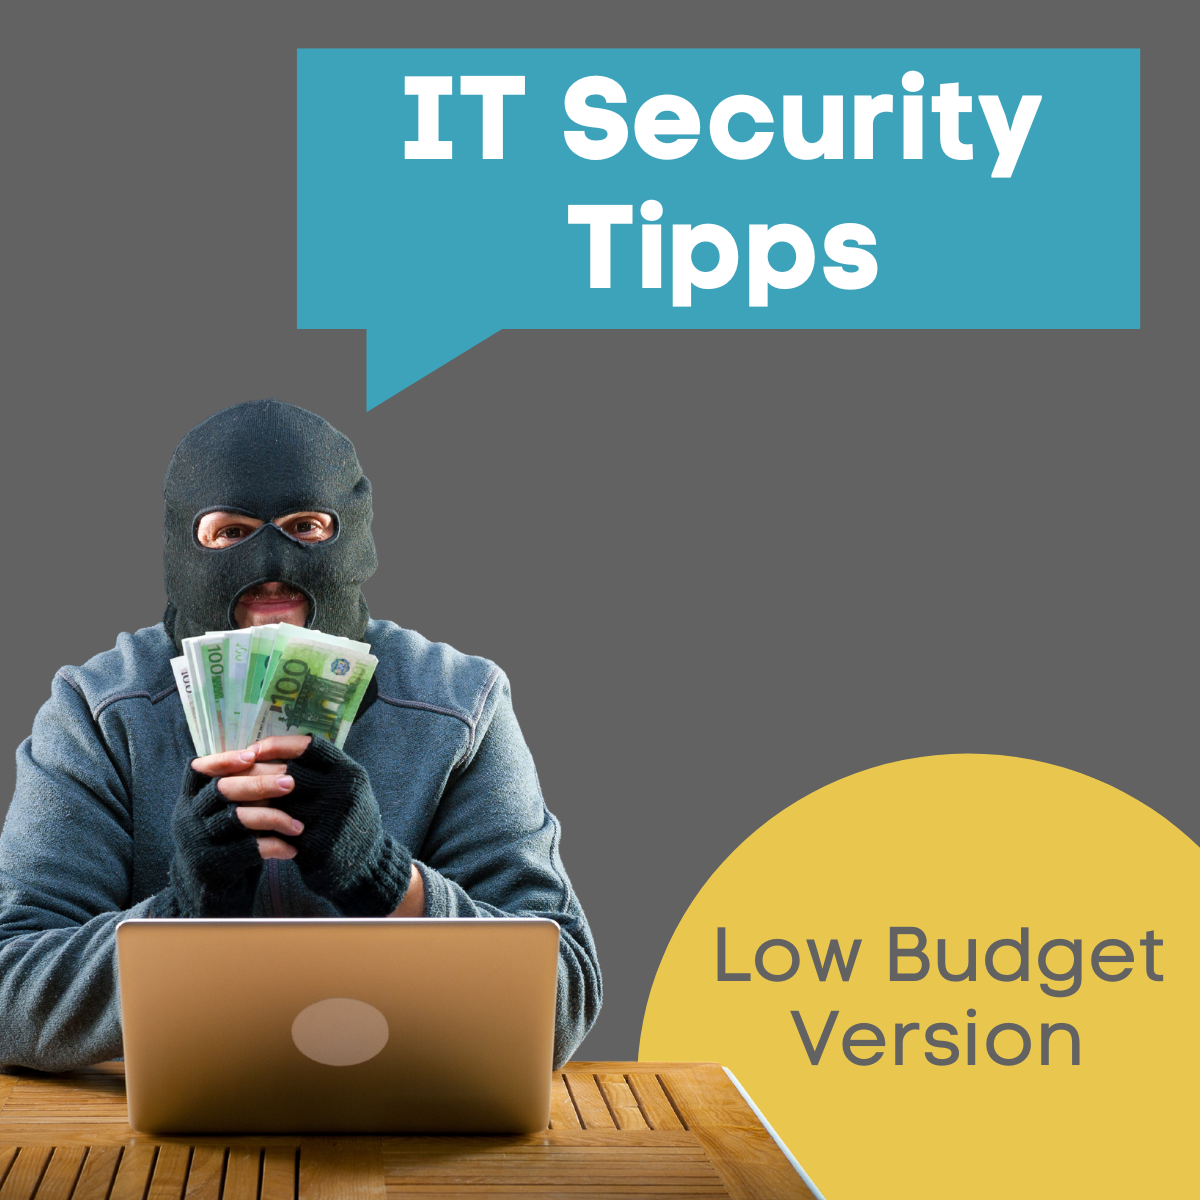 IT Security Tipps